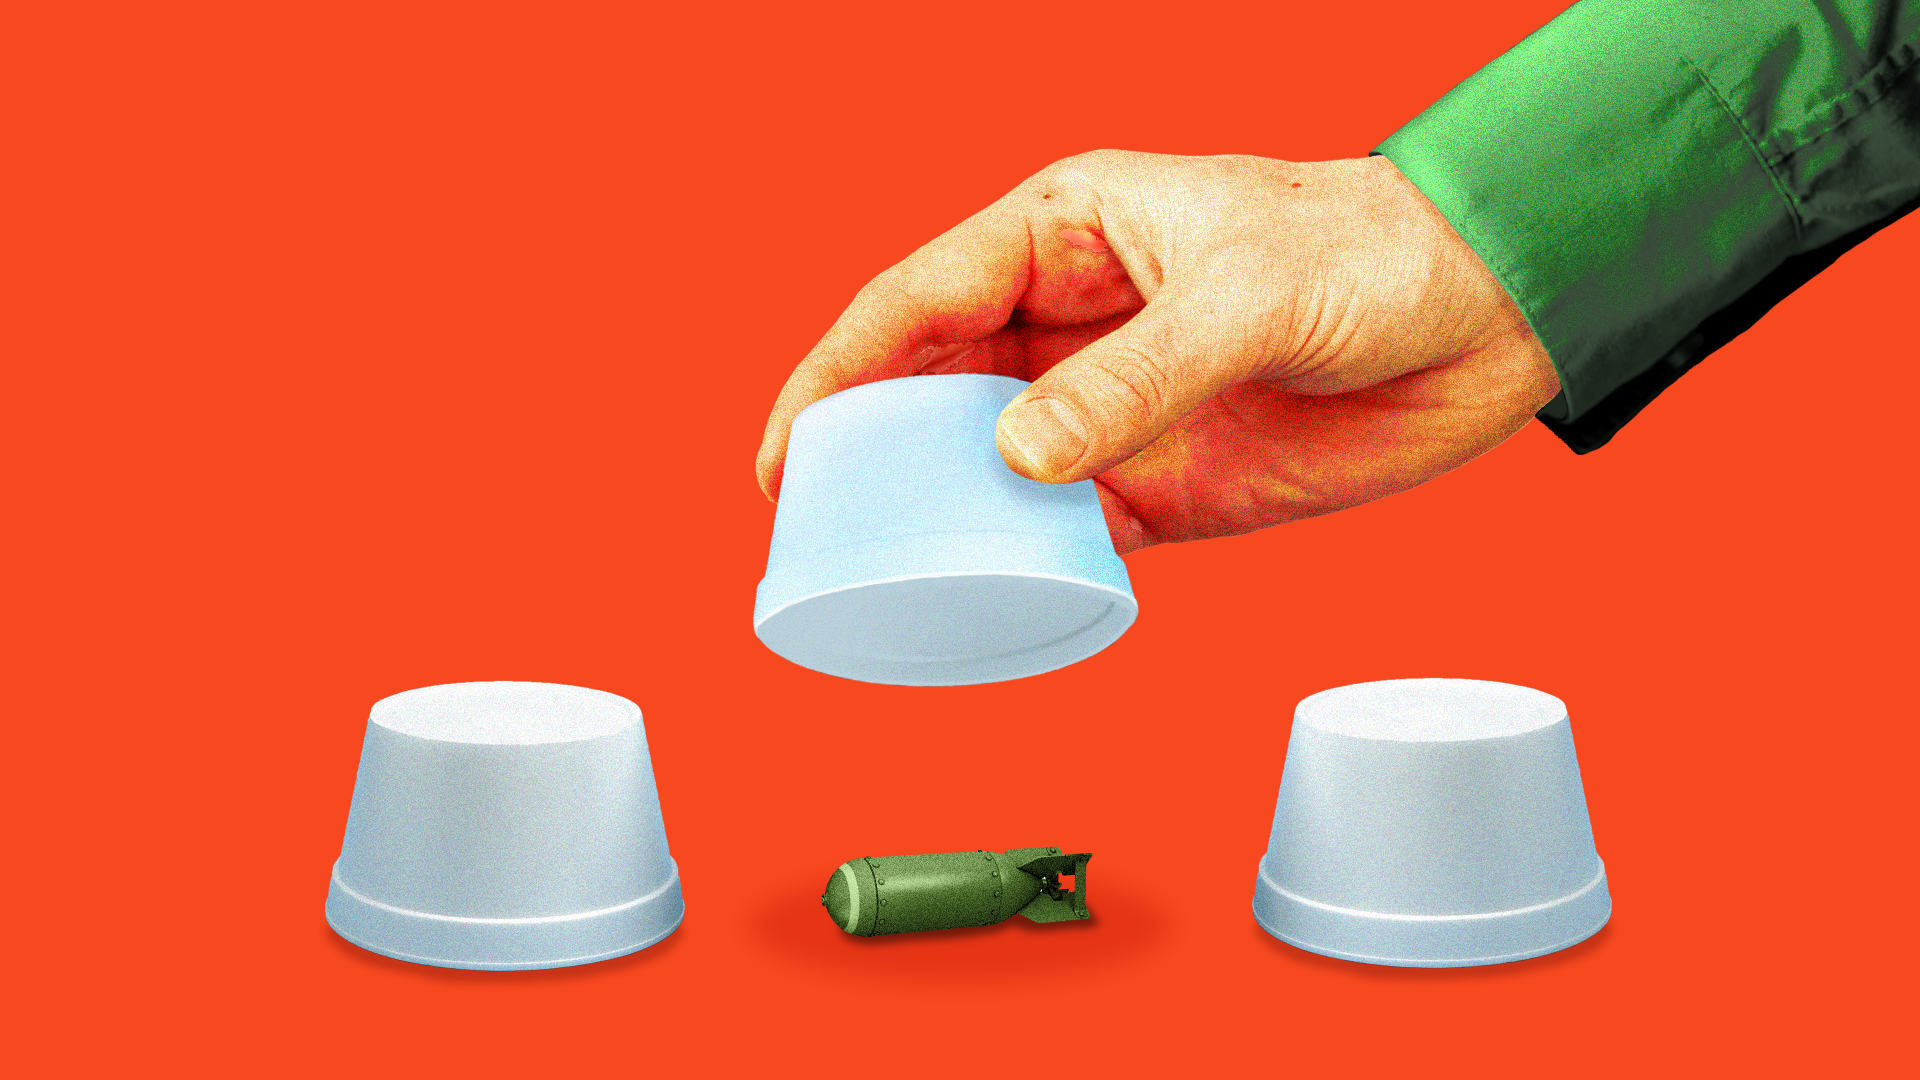 Illustration of three white cups and one is raised up to reveal a weapon before a red background.